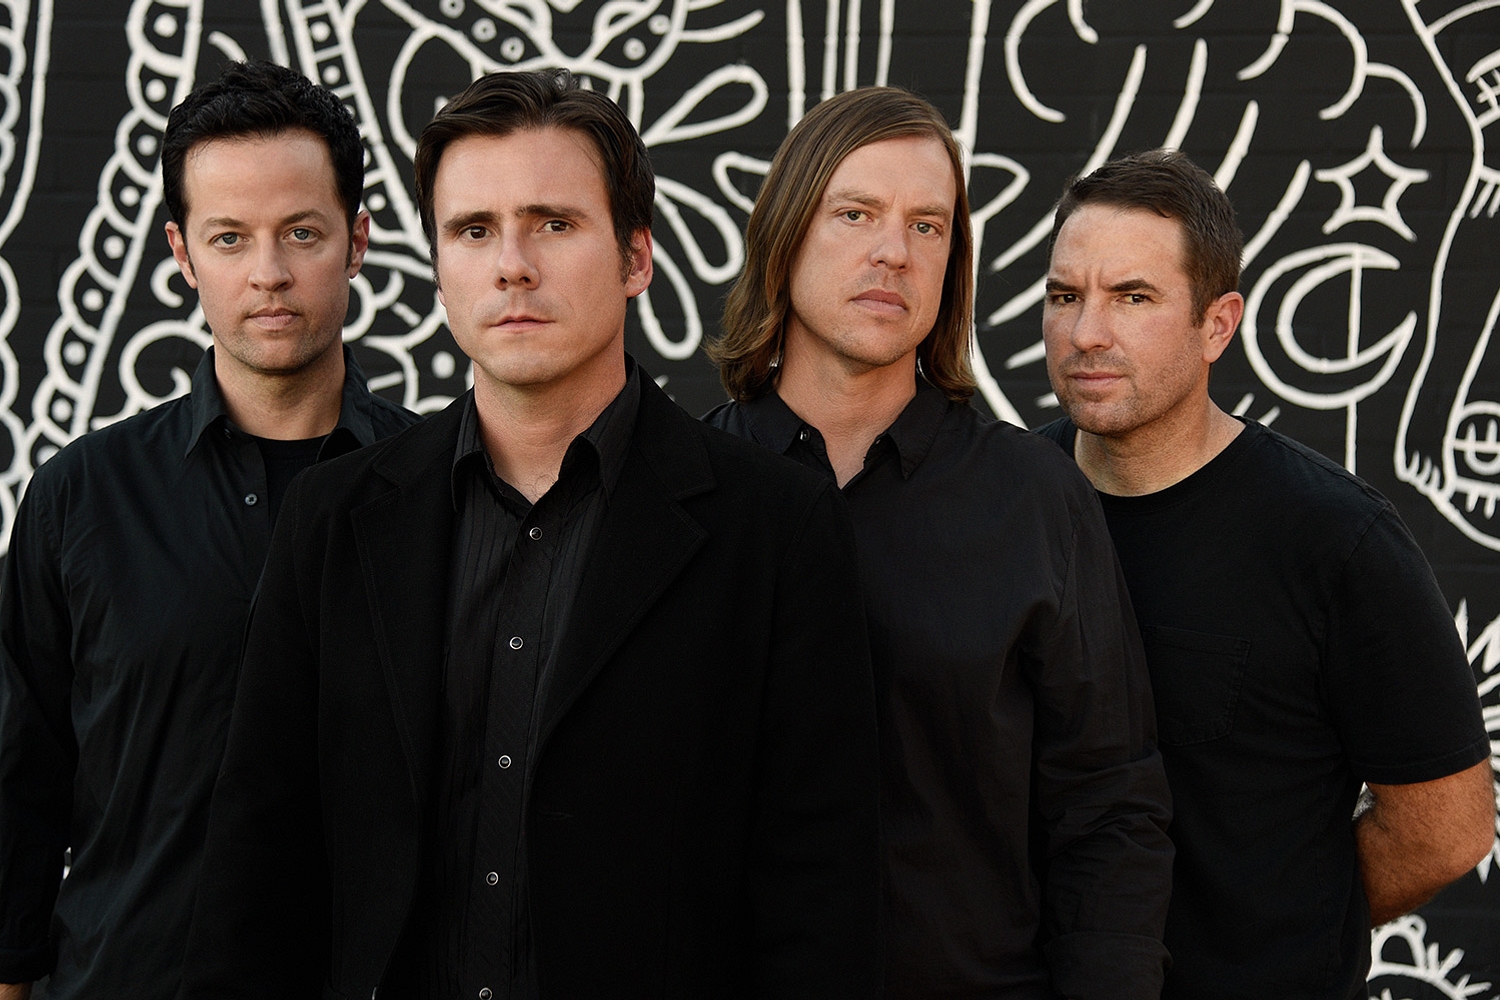 Jimmy Eat World bring ‘Get Right’ to Conan